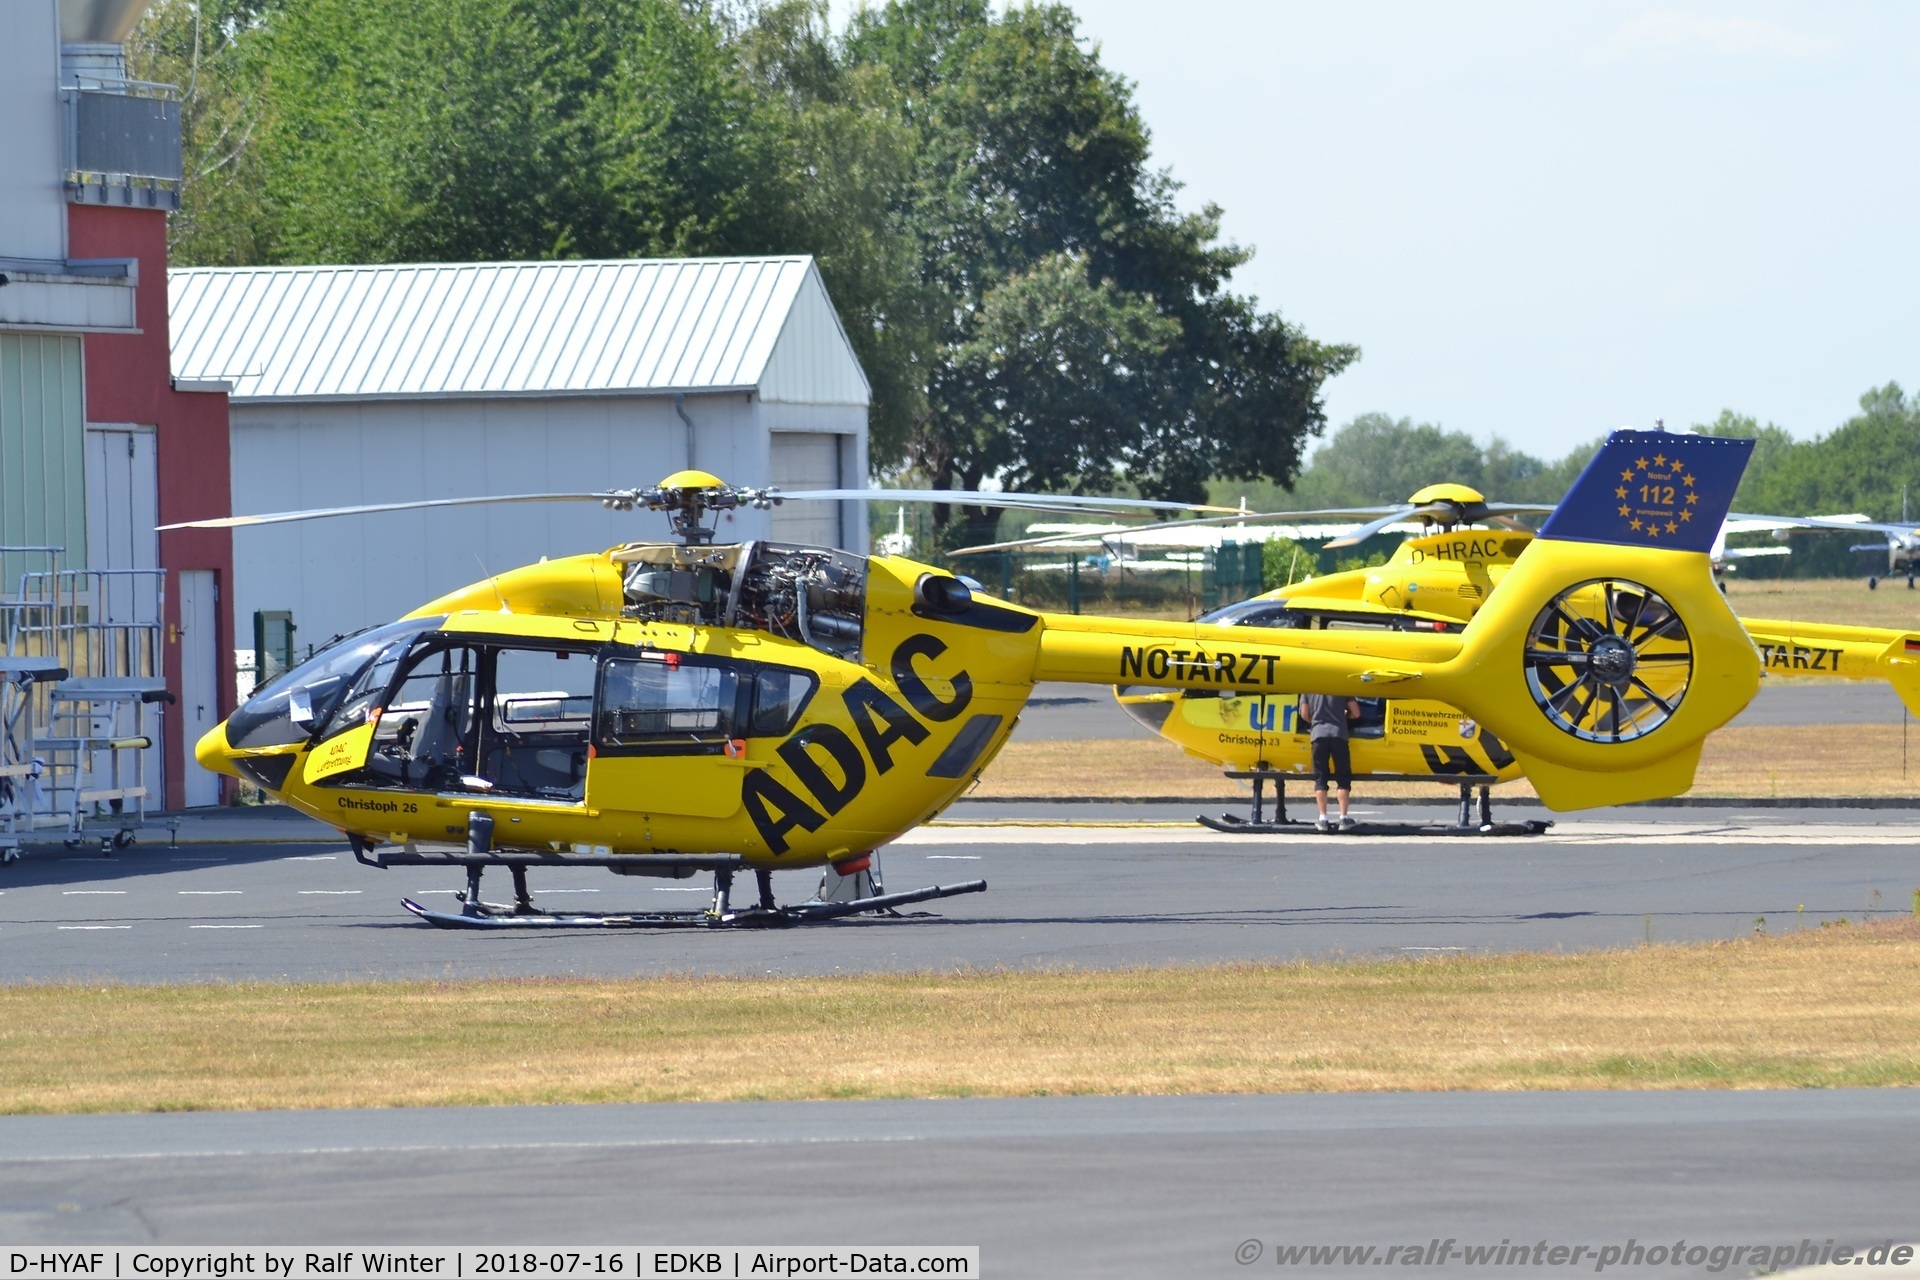 D-HYAF, Airbus Helicopters EC-145T-2 (BK-117D-2) C/N 20043, Airbus Helicopters H-145 - CHX ADAC Luftrettung - 20043 - D-HYAF - 16.07.2018 - EDKB